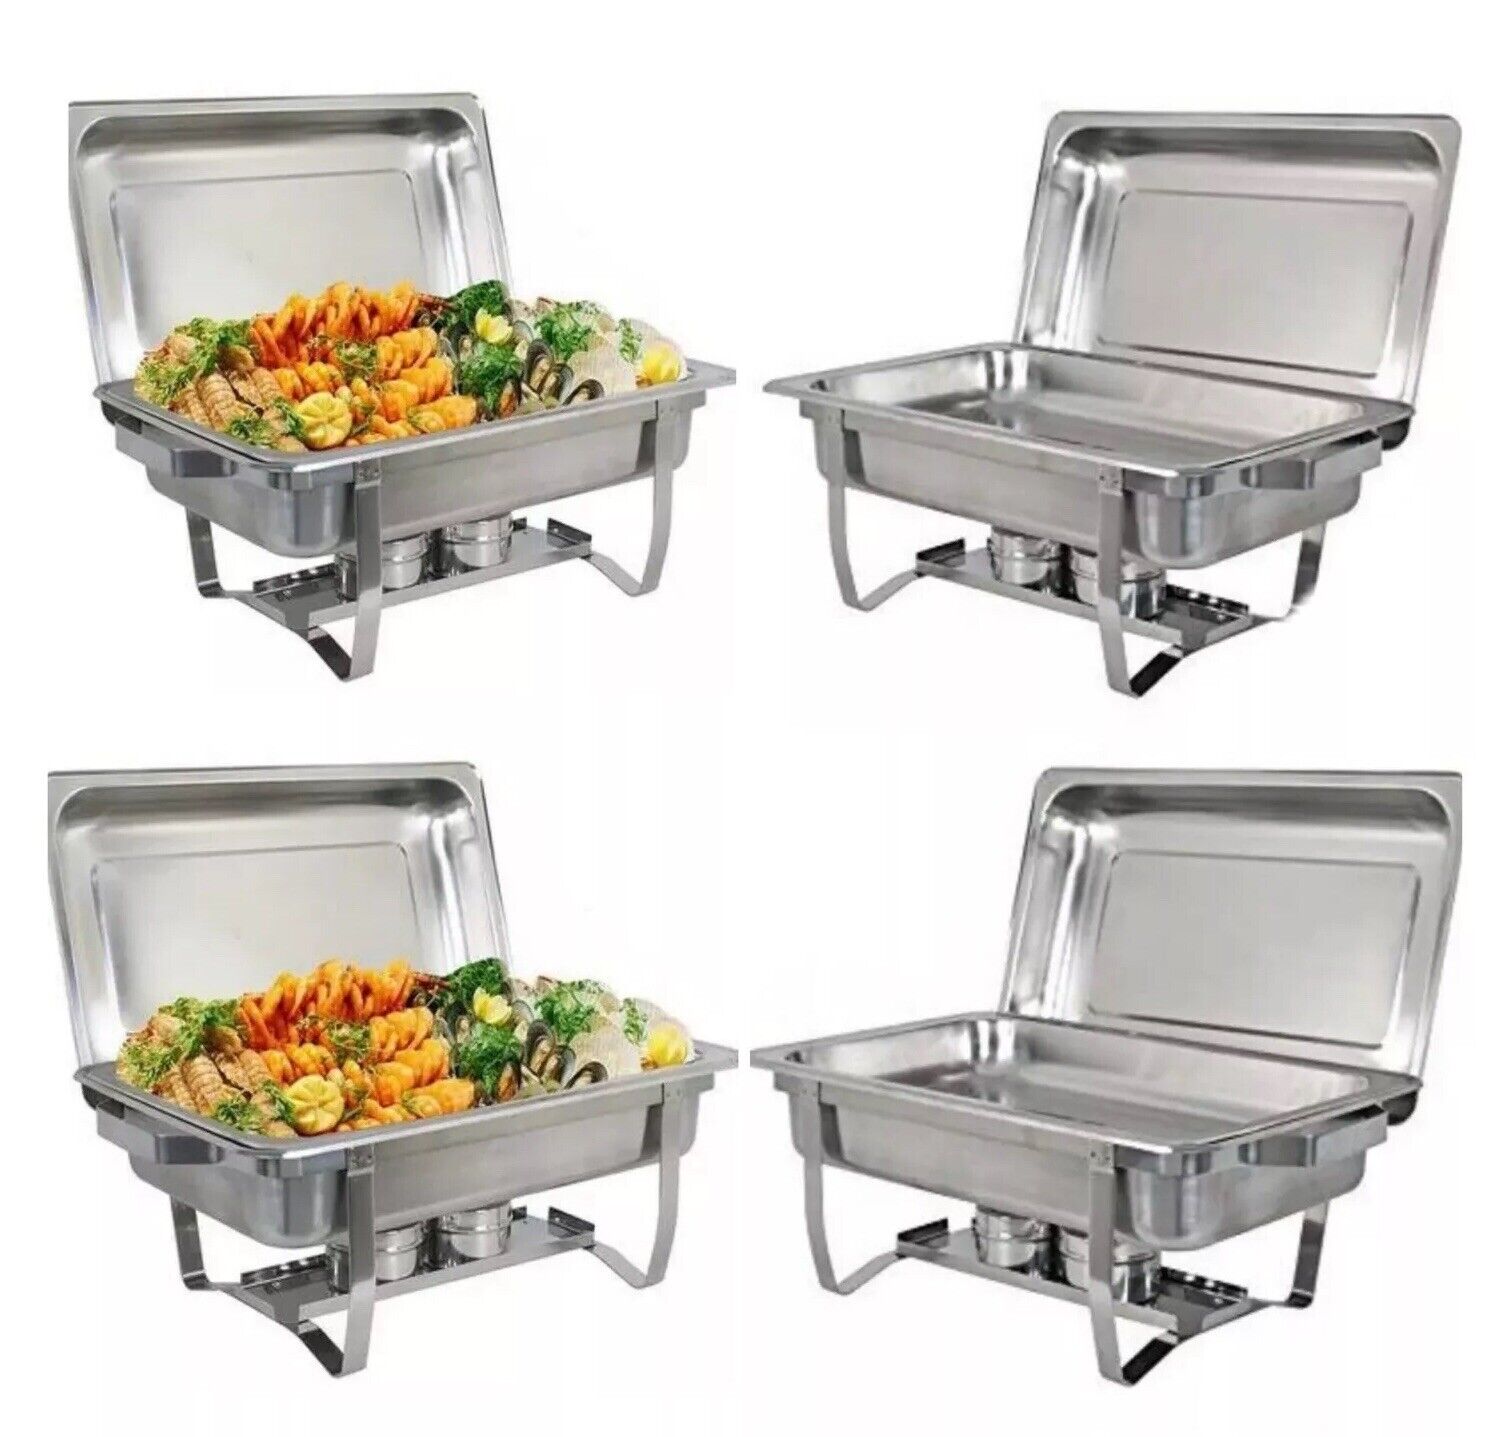 Stainless Steel CHAFER DISH - 8 QT Full Size Buffet Catering Party - 4 pack